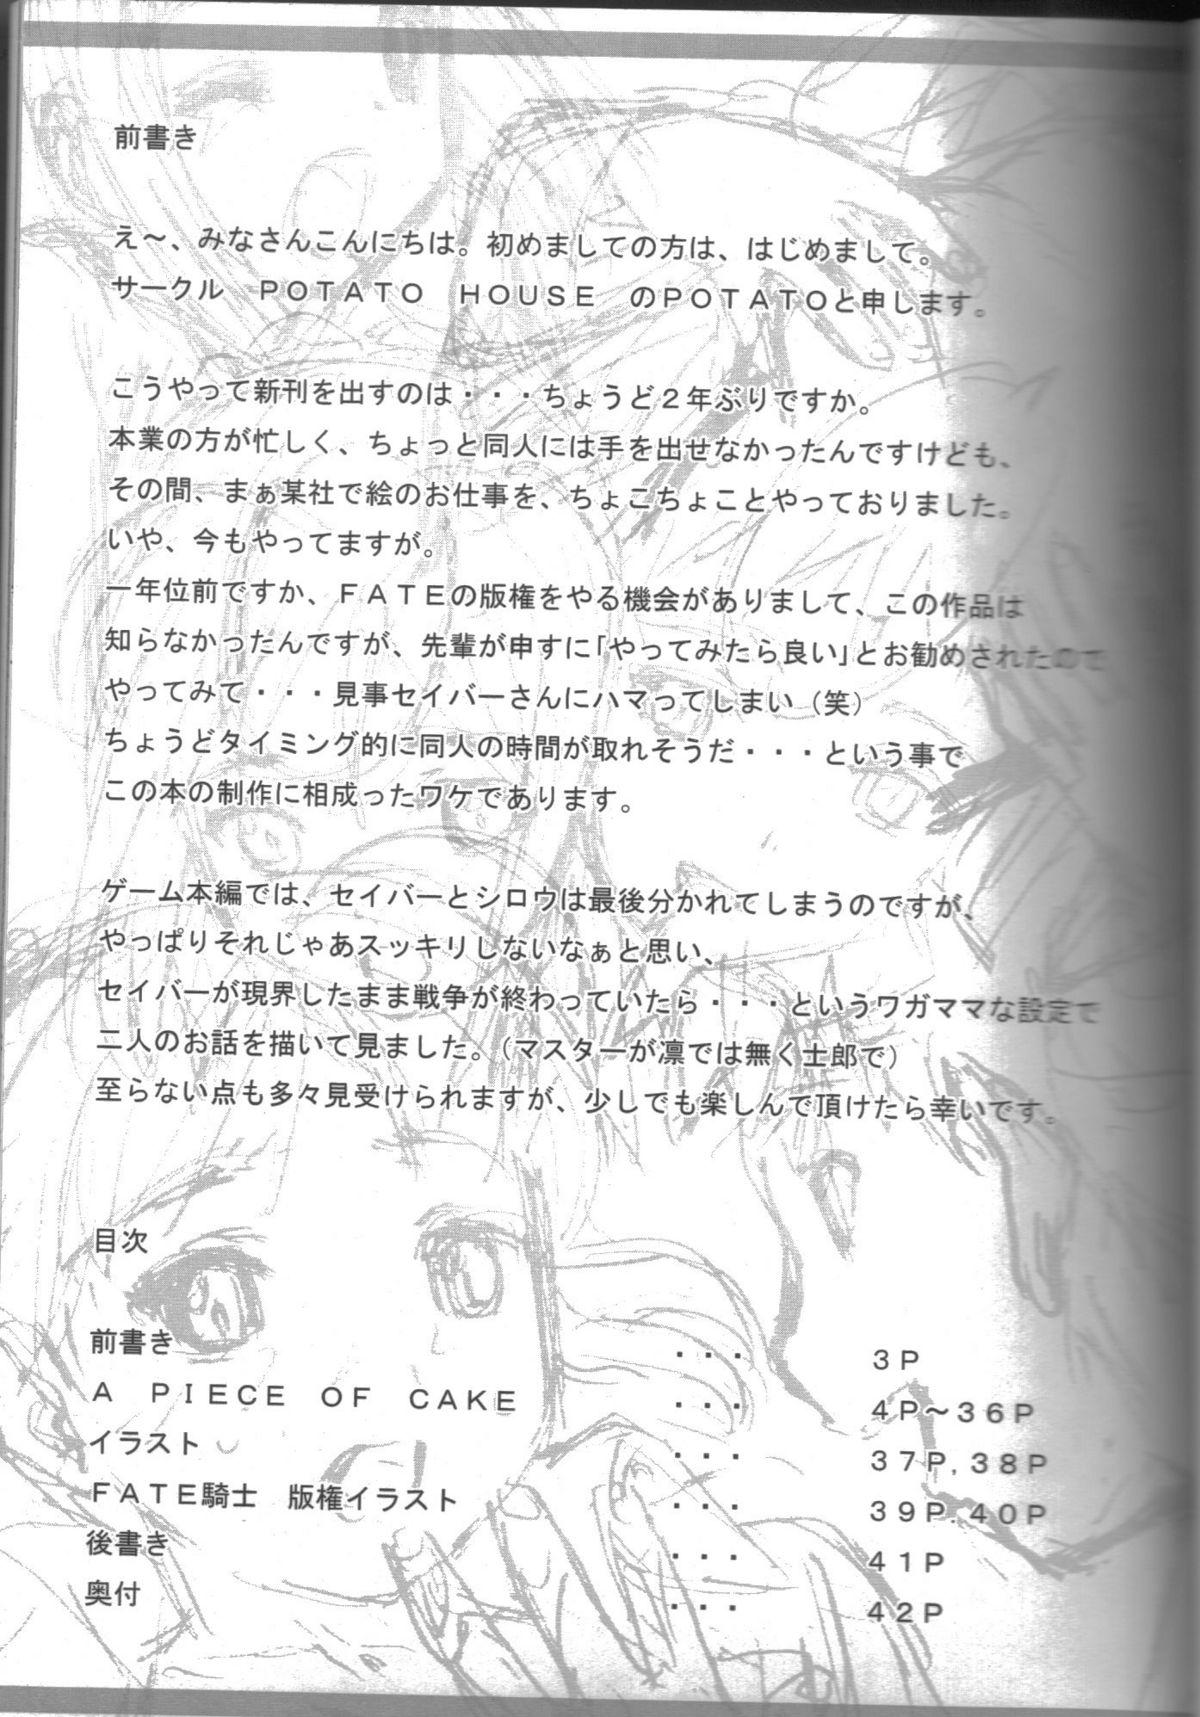 Tan A PIECE OF CAKE - Fate stay night Homemade - Page 2